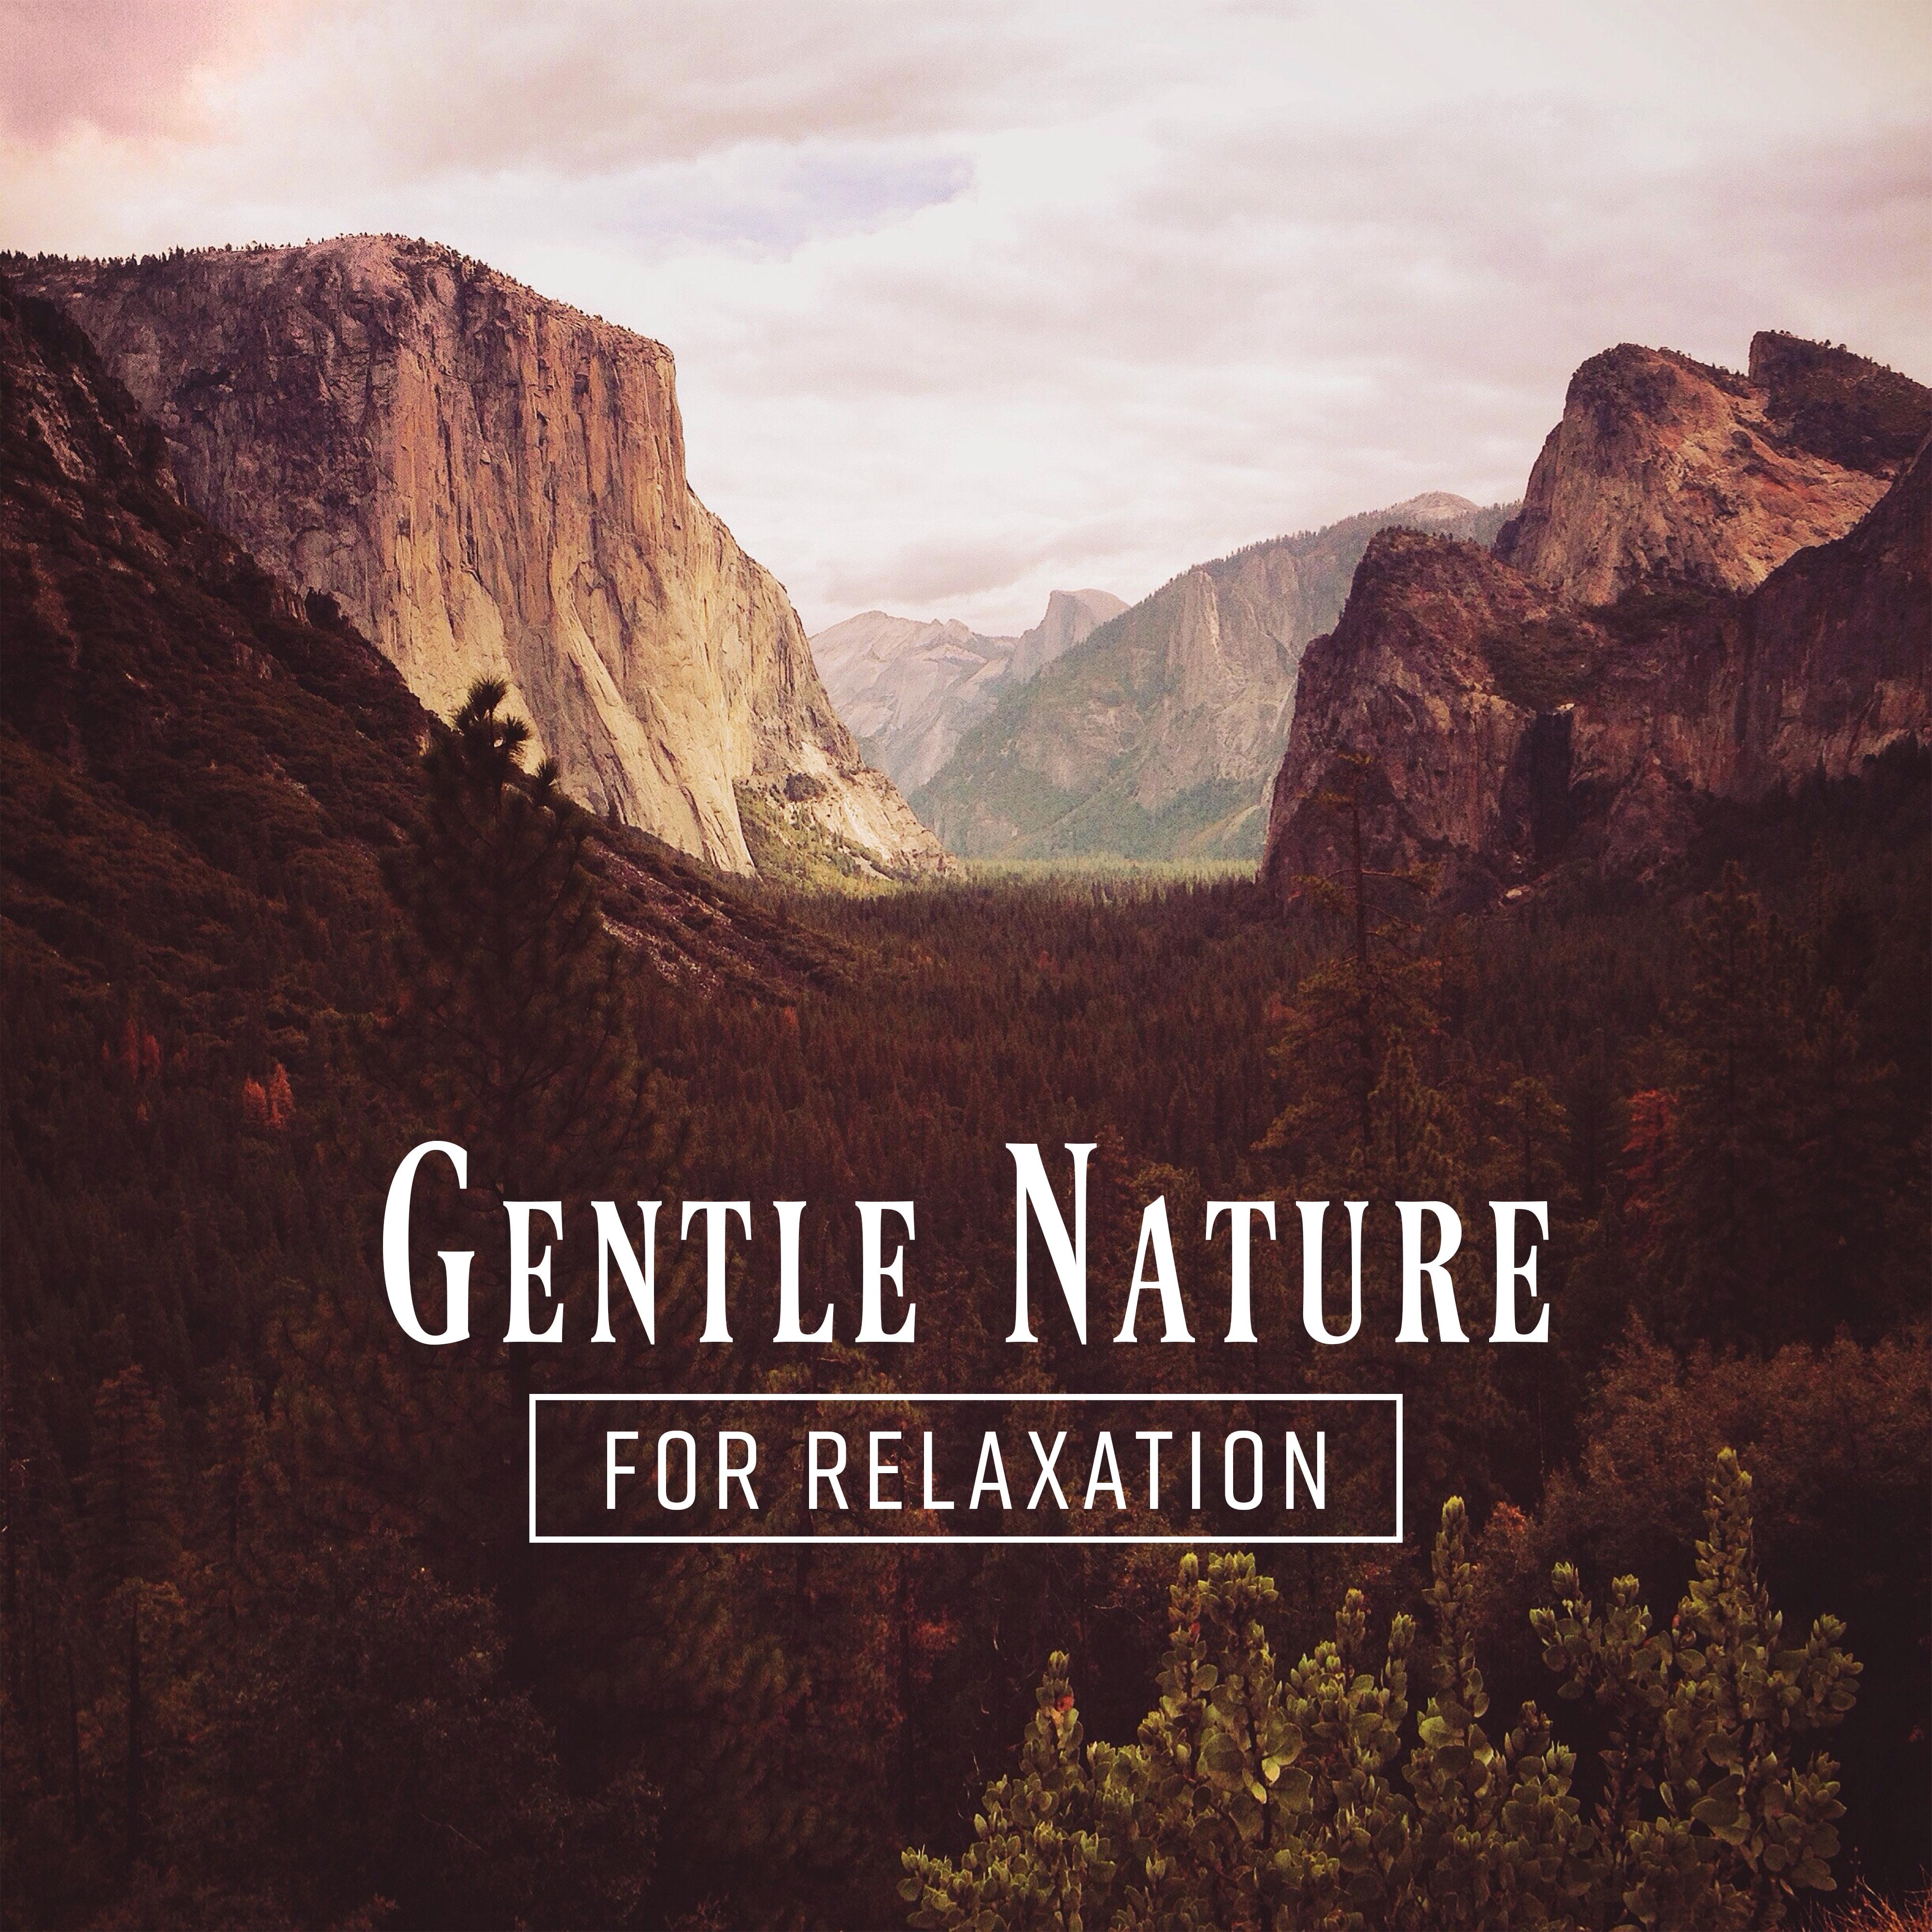 Gentle Nature for Relaxation